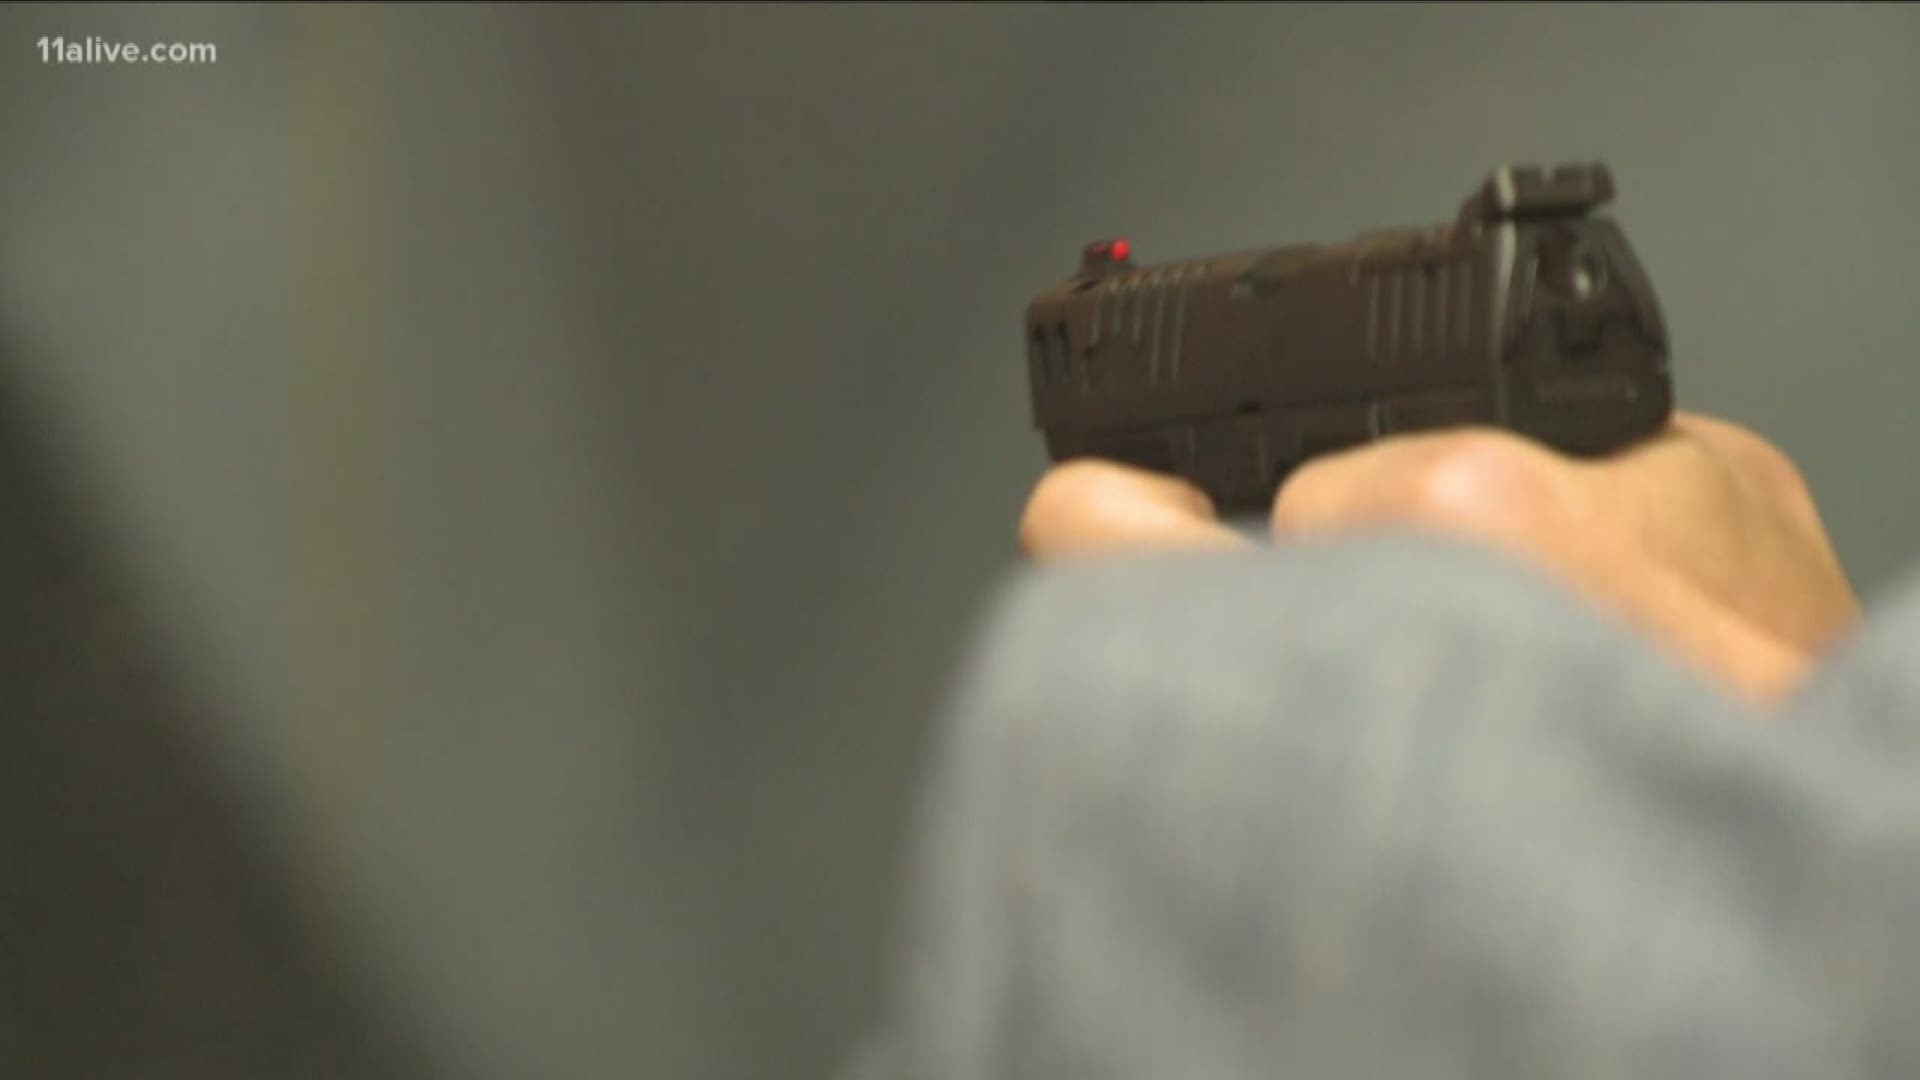 New bill allowing Georgians to carry guns without permits has been filed for the upcoming session of the legislature.